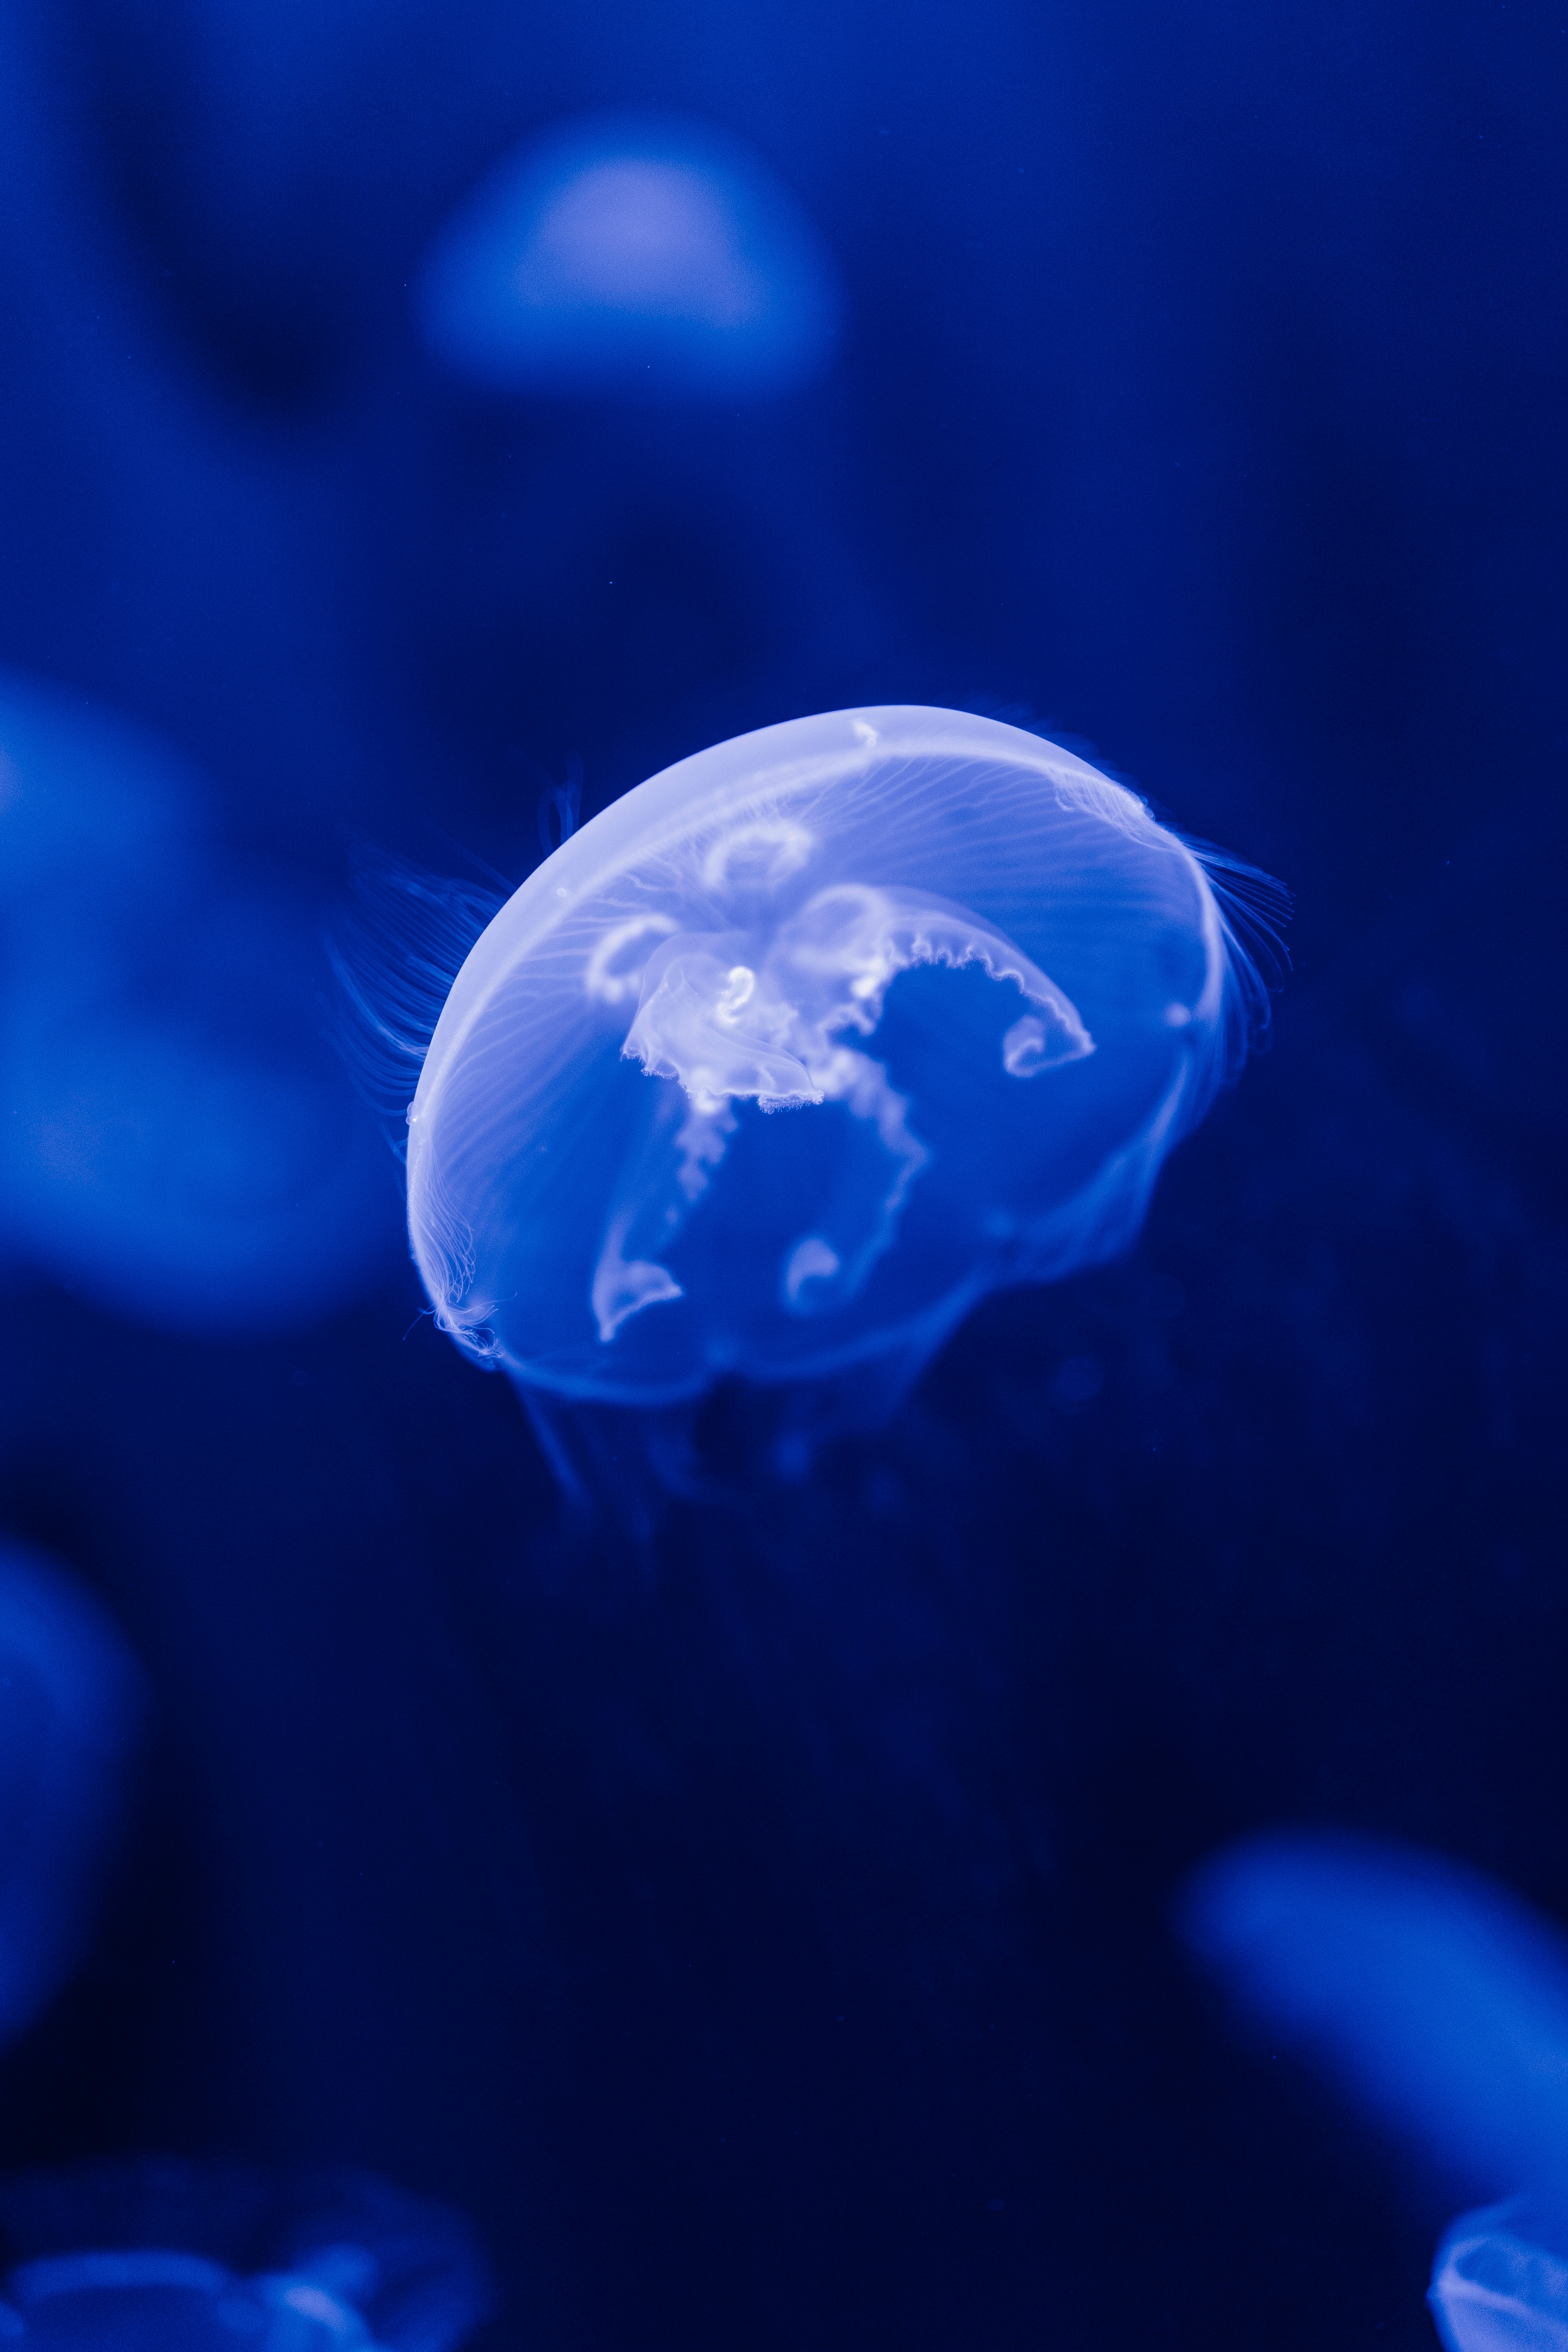 under water, blue, animals, sea, jellyfish, transparent, underwater cell phone wallpapers